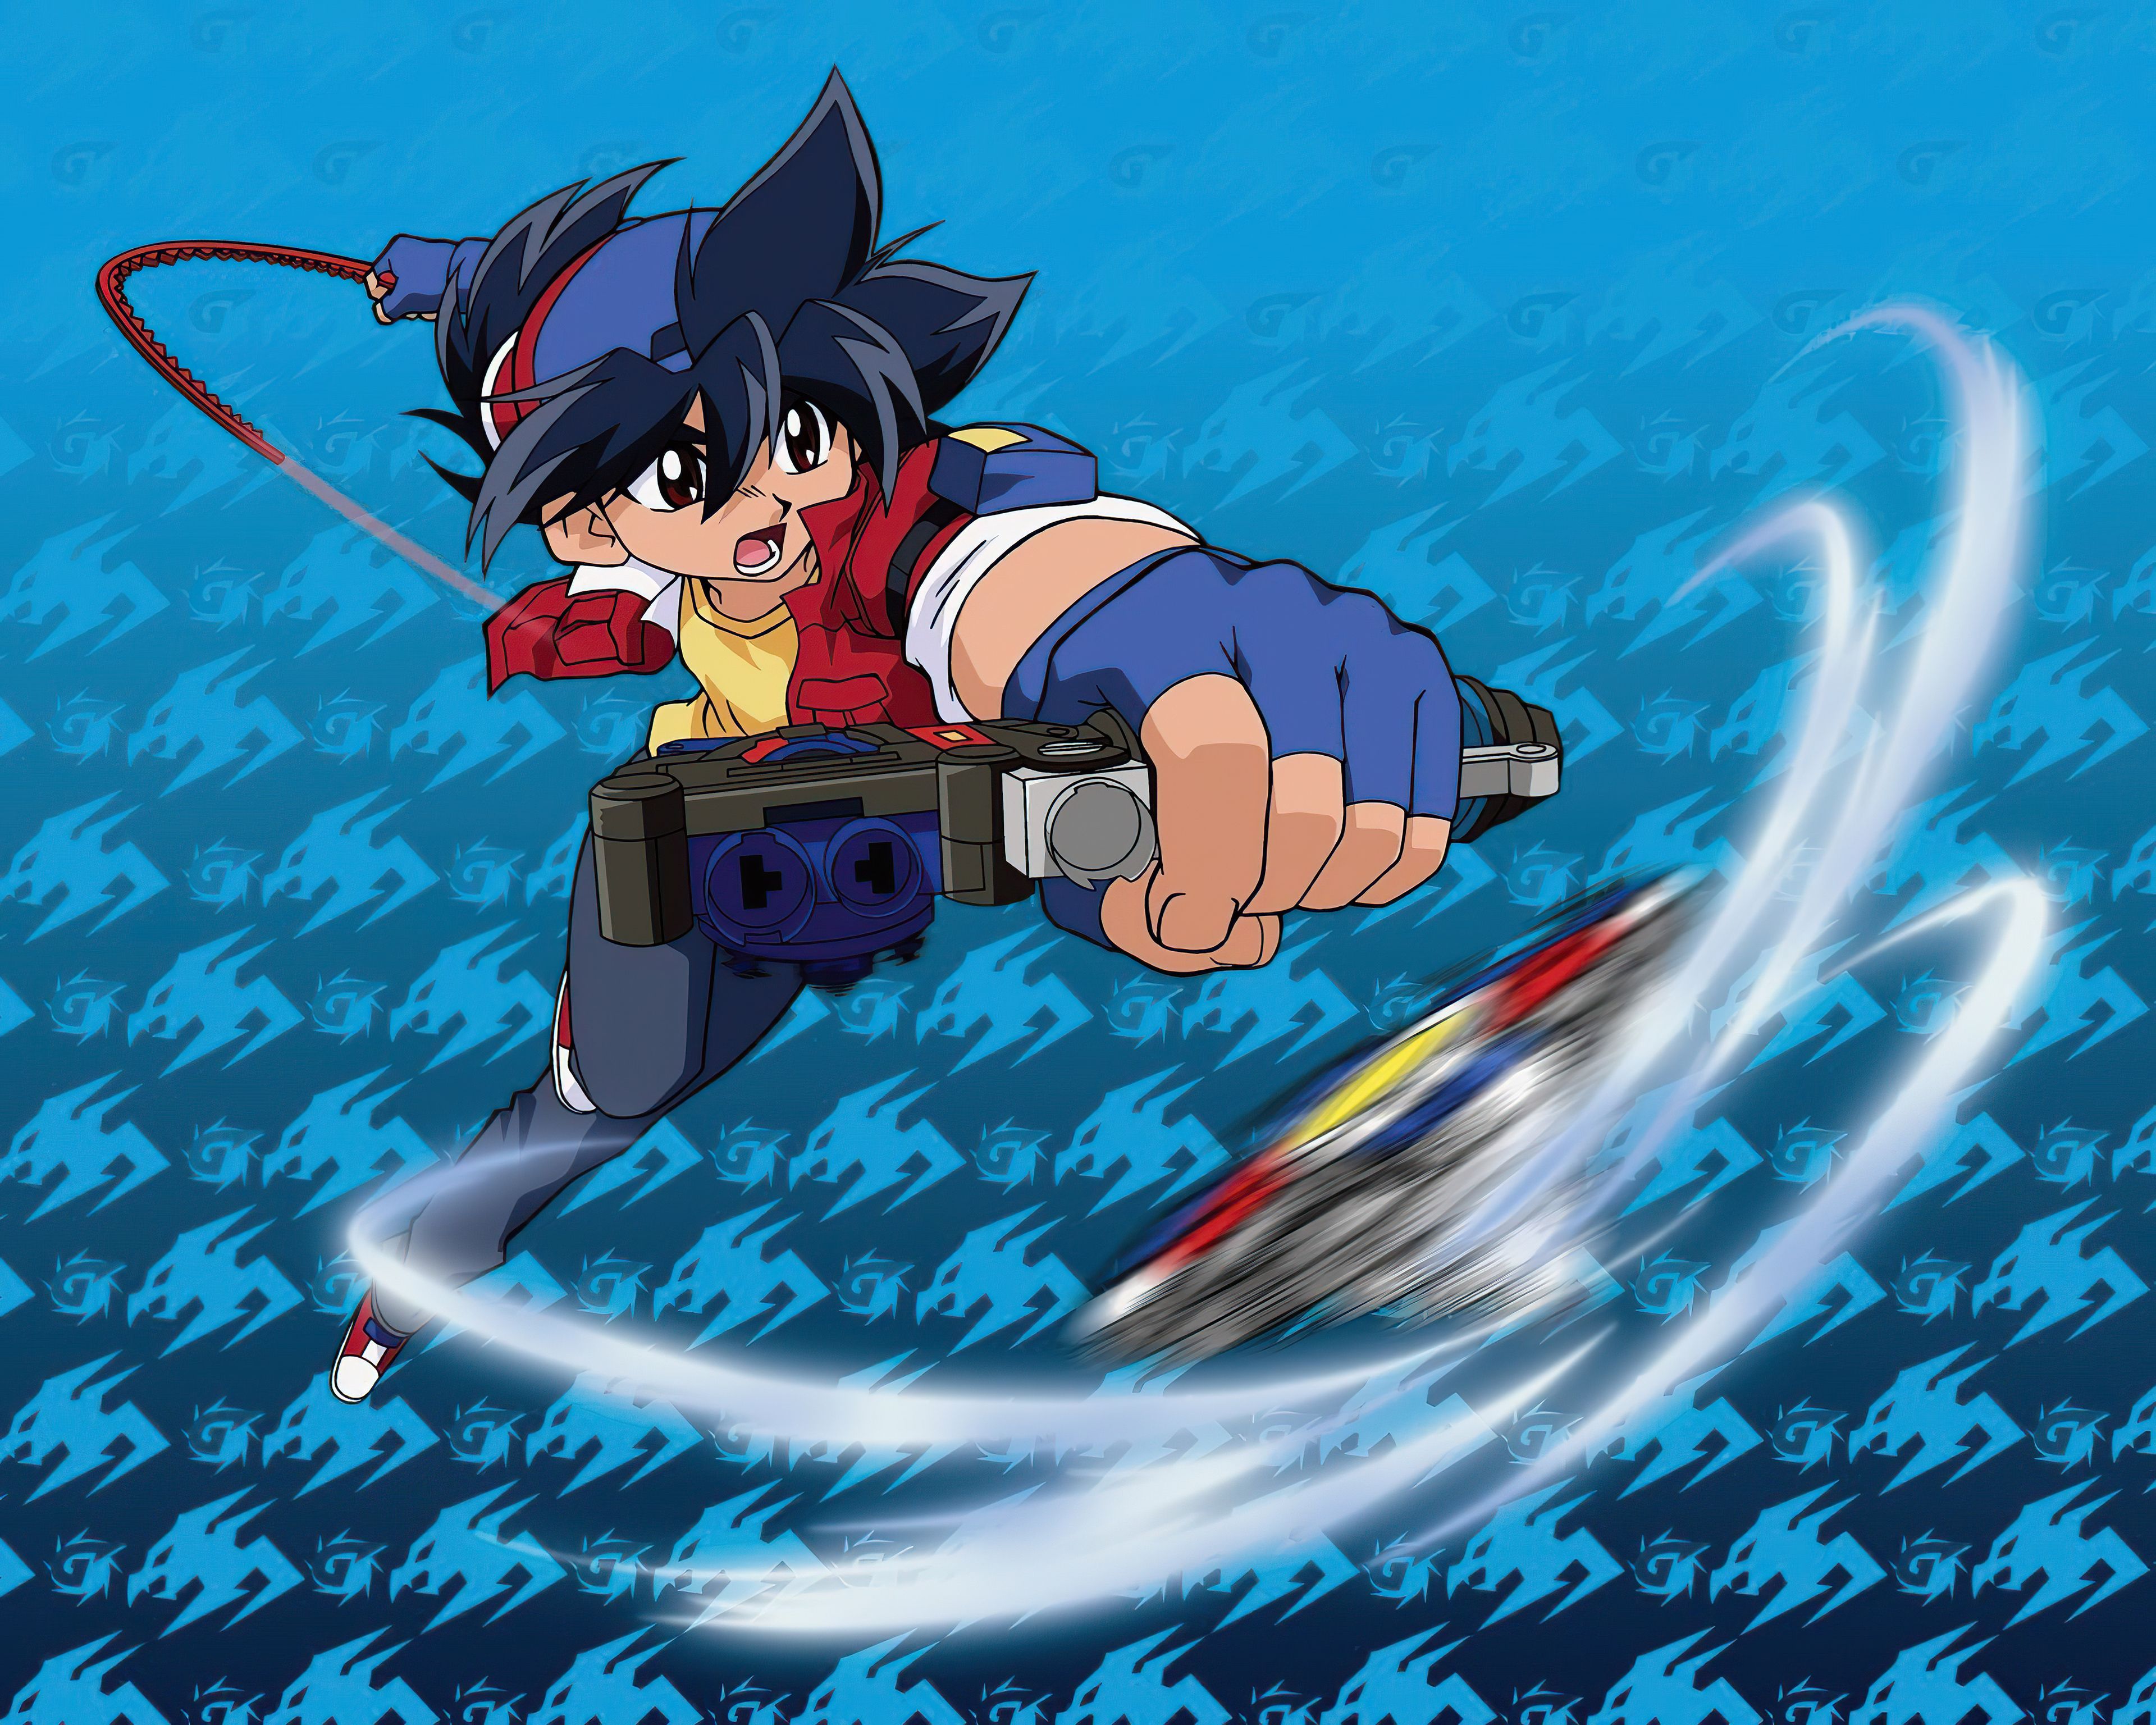 Beyblade G Revolution, HD Anime, 4k Wallpapers, Image, Backgrounds, Photos ...